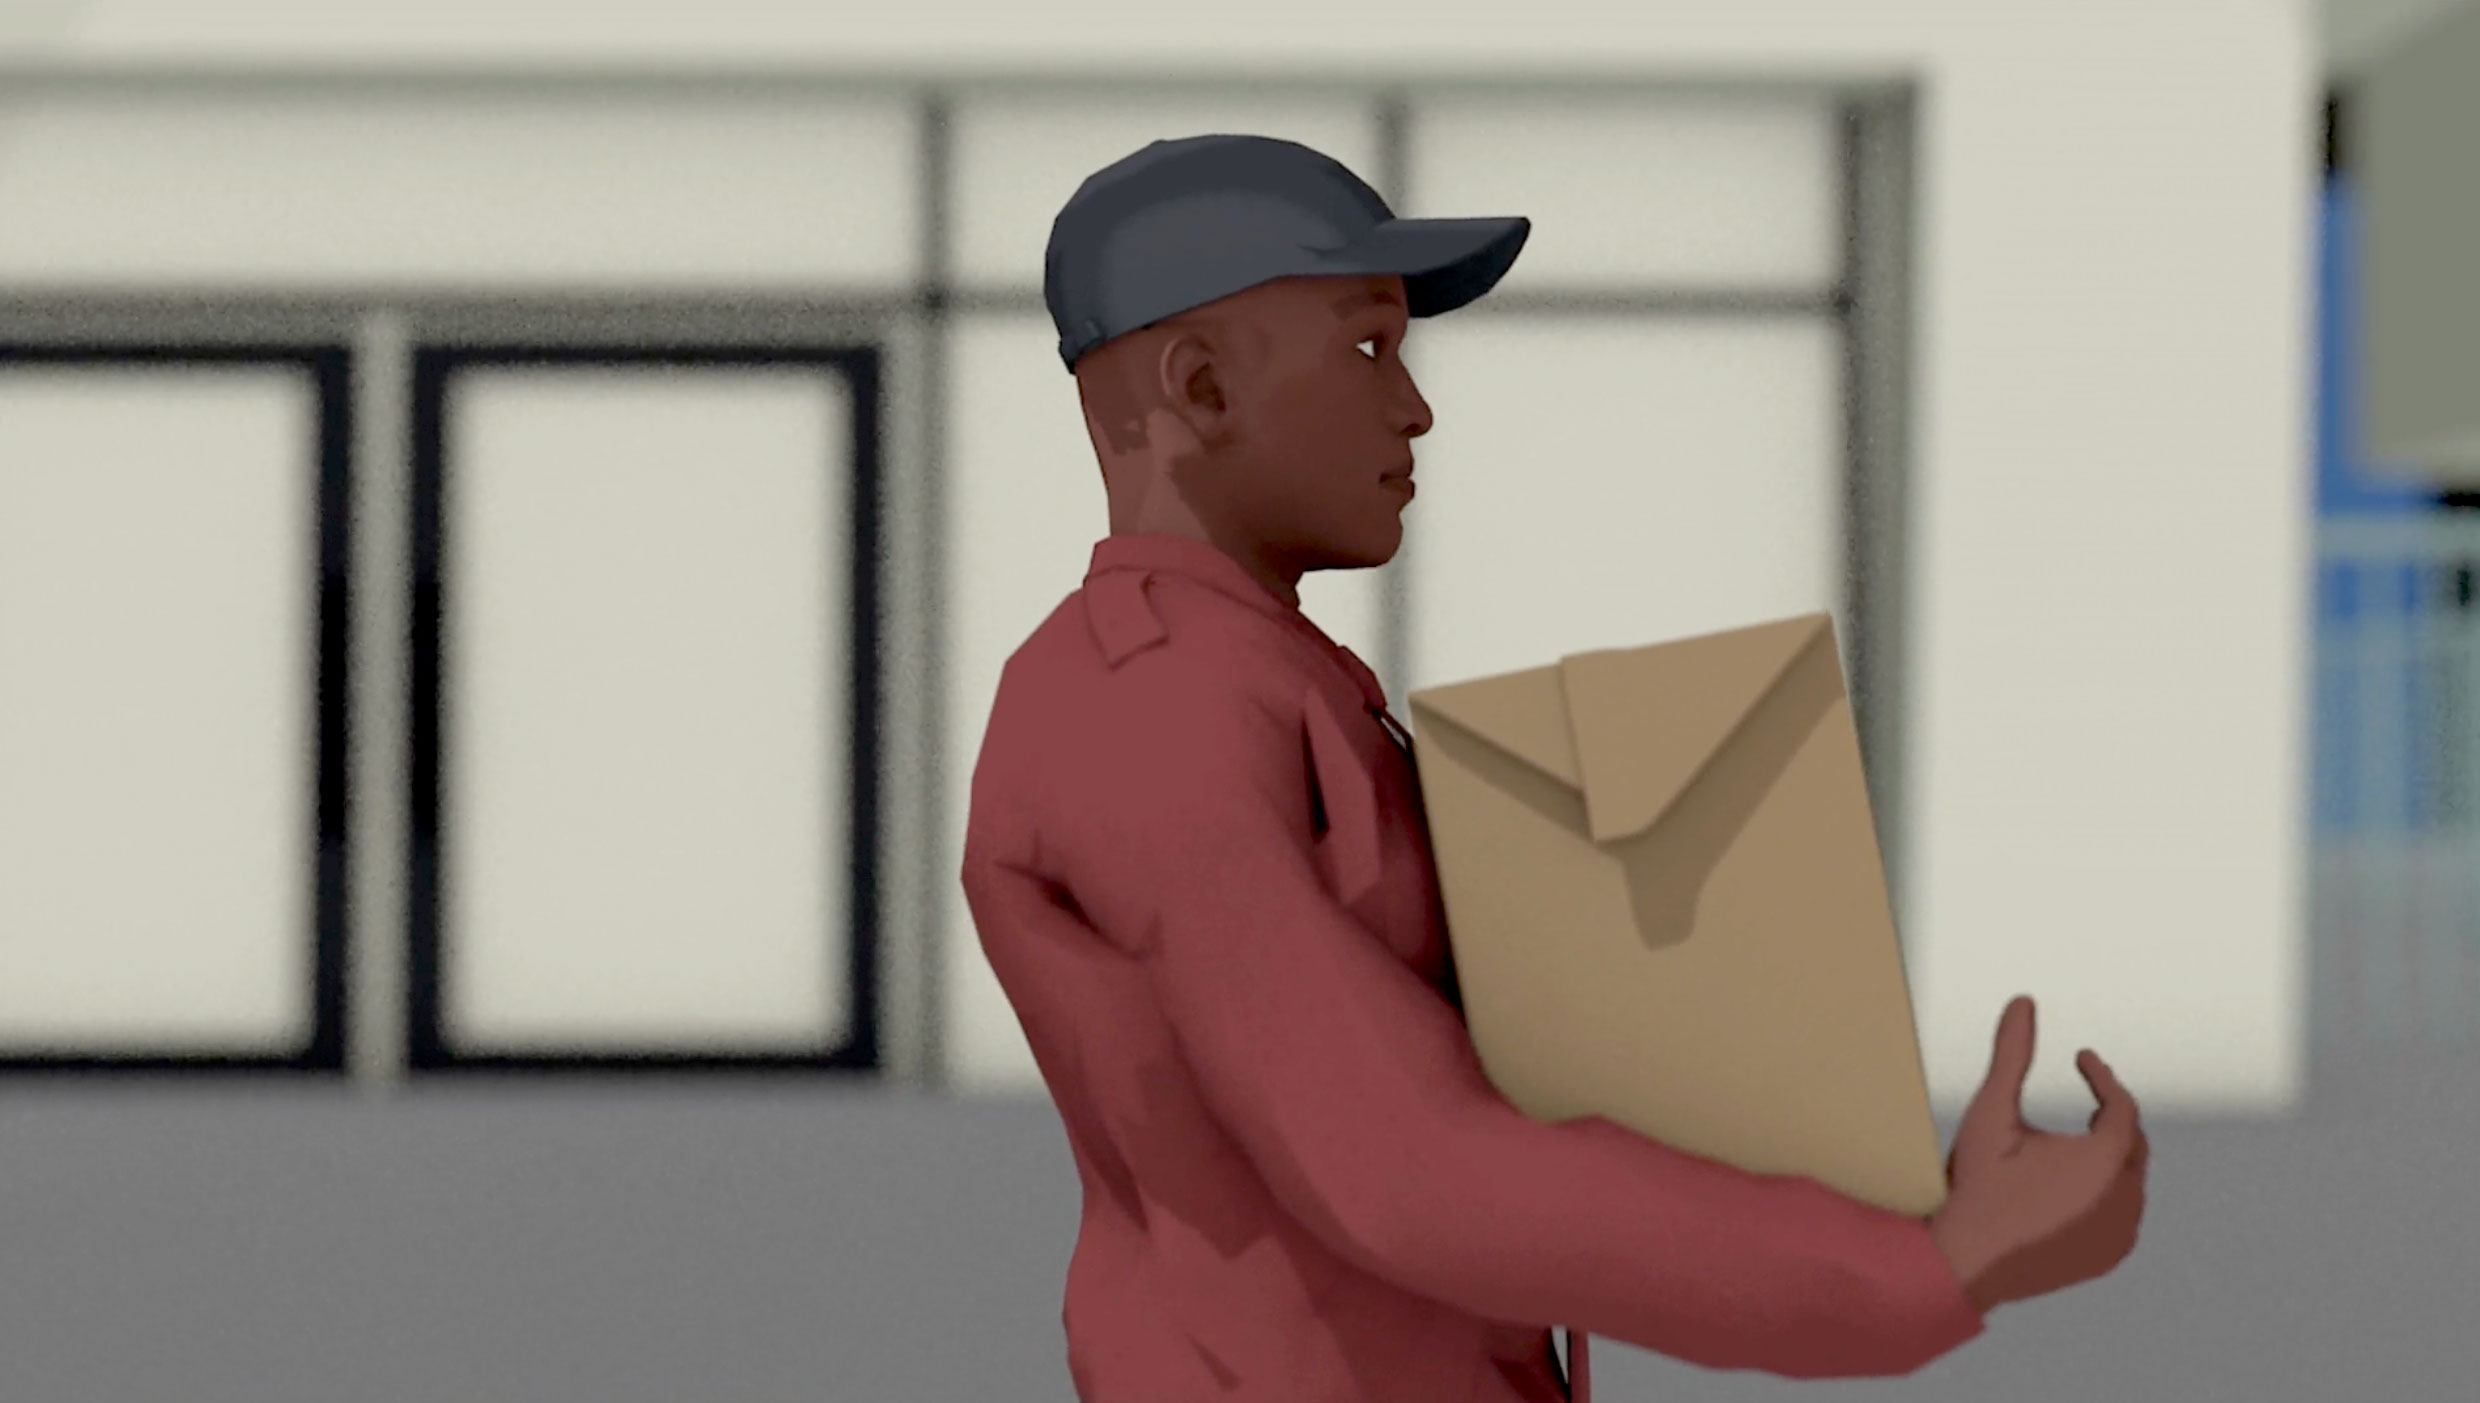 Delivery driver carrying package